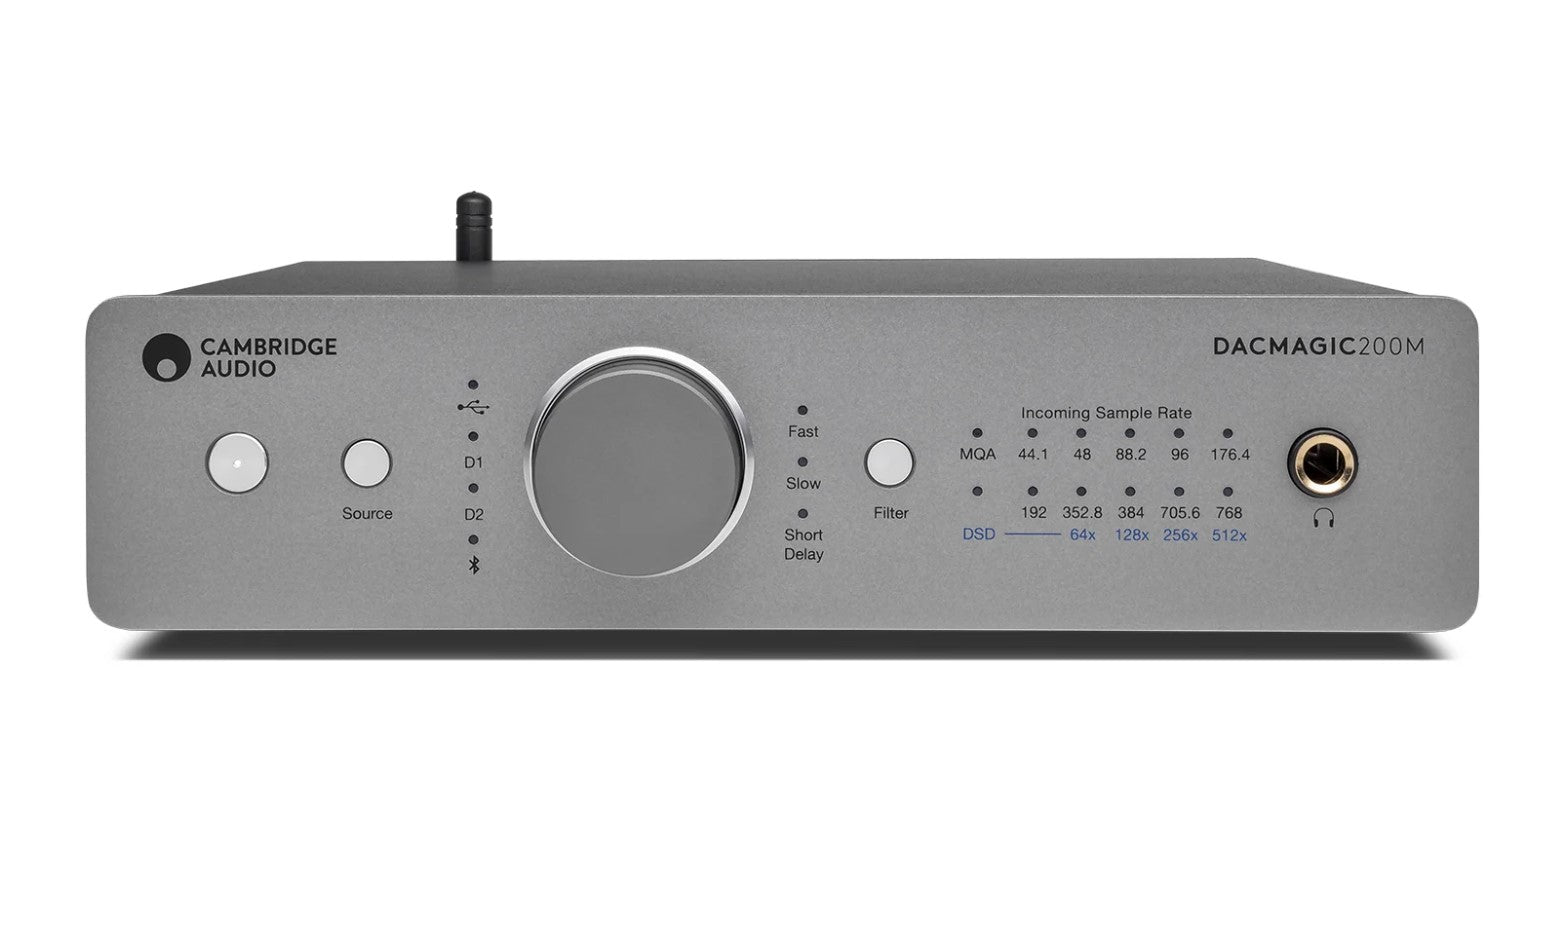 Cambridge Audio DAC200M-RB DacMagic 200M Stereo Digital to Analogue Converter DAC Preamp, Headphone Amplifier, Built-in Bluetooth, Lunar Grey - Certified Refurbished